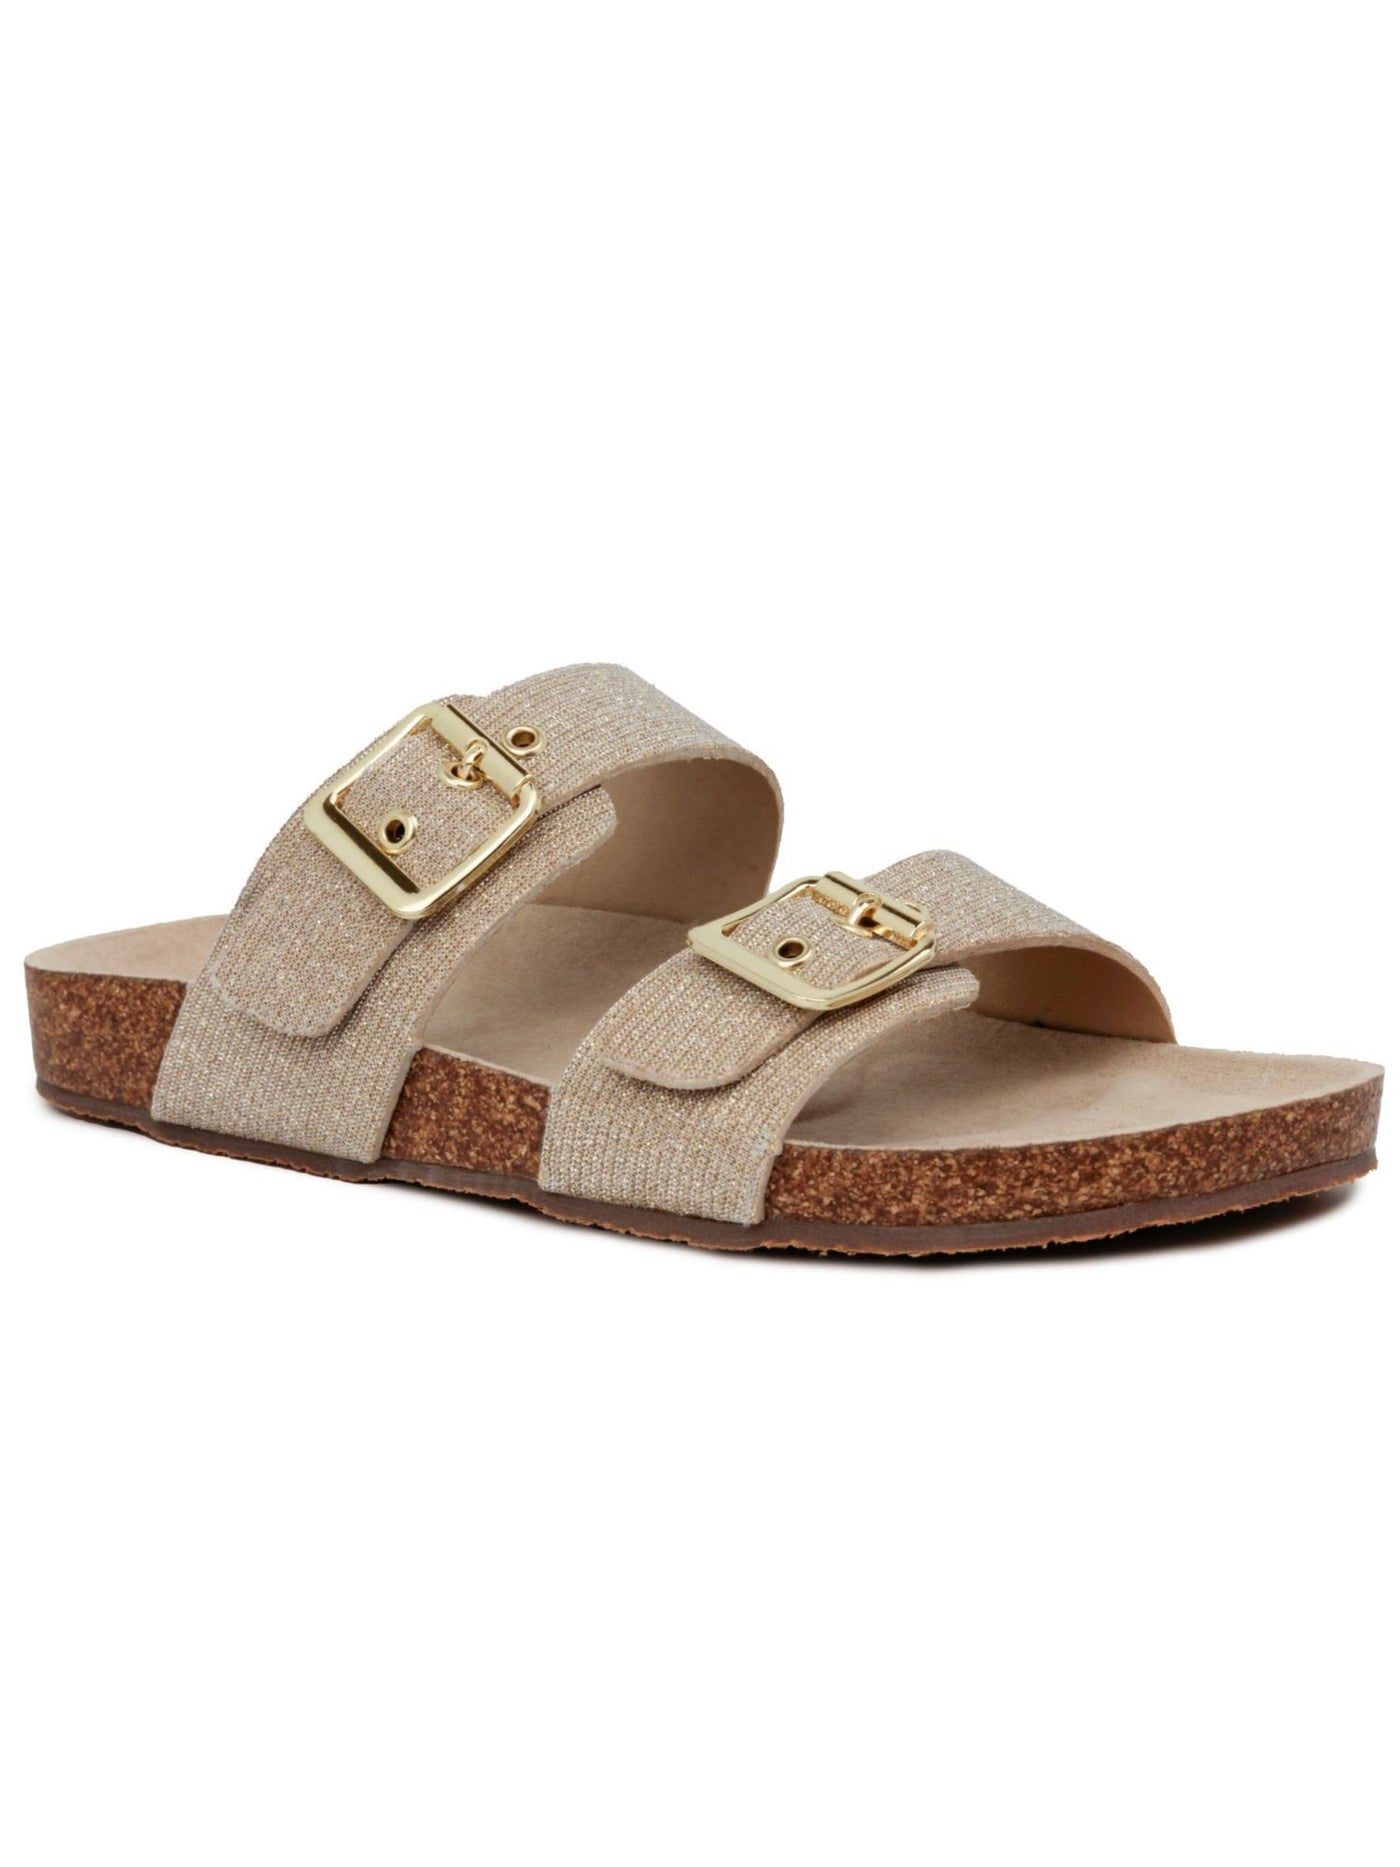 JONES NY Womens Gold Double Band Cork-Like Jute Buckle Accent Arch Support Weslee Round Toe Platform Slip On Slide Sandals 9 M